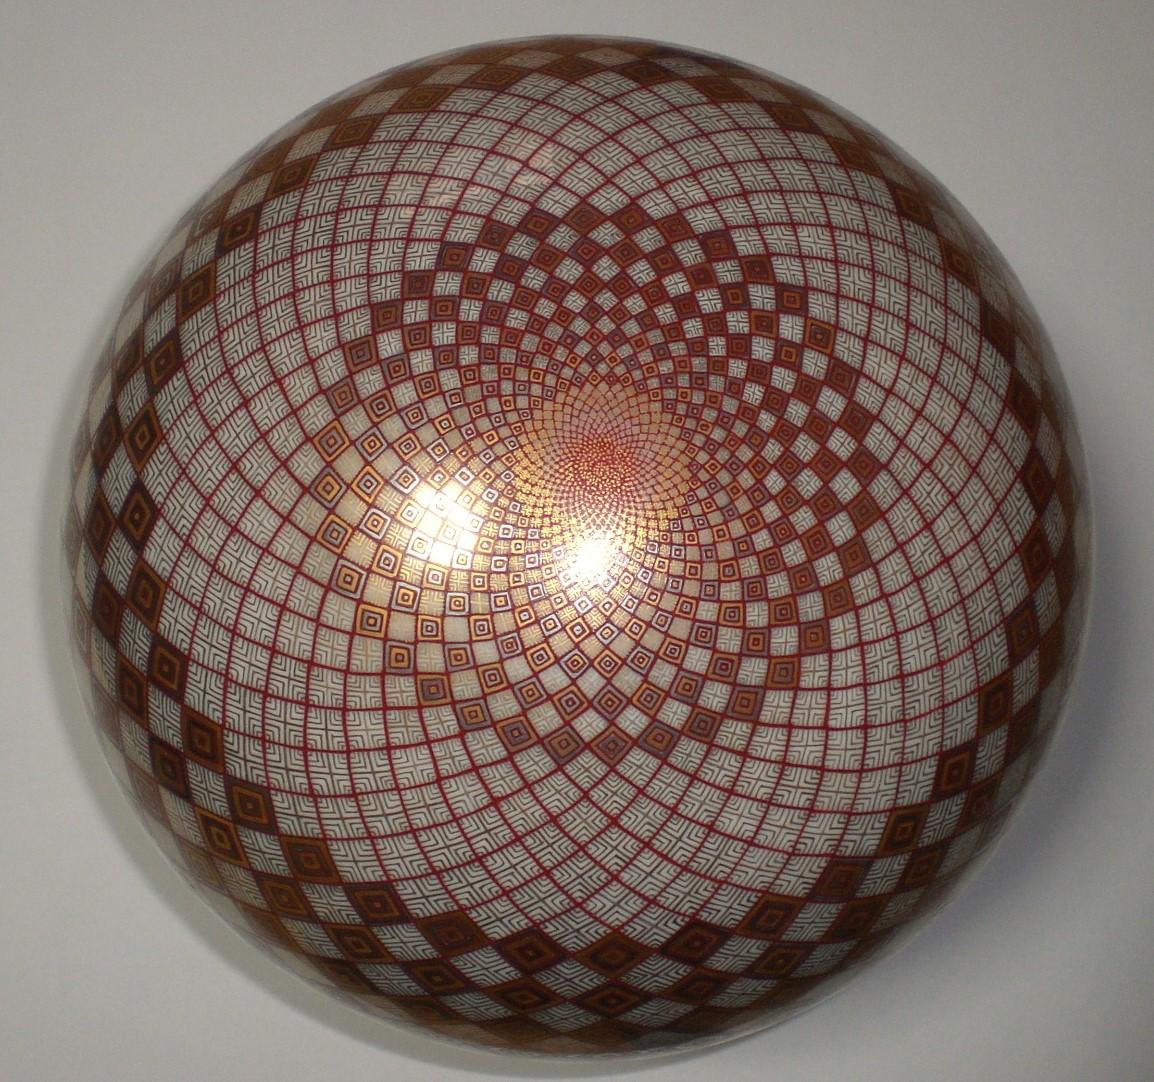 Extraordinary Japanese contemporary decorative porcelain box, extremely intricately platinum and gold gilded and hand painted on an exquisite ovoid shape body, featuring an extremely intricate geometric progression expressed in red, cream, gold and